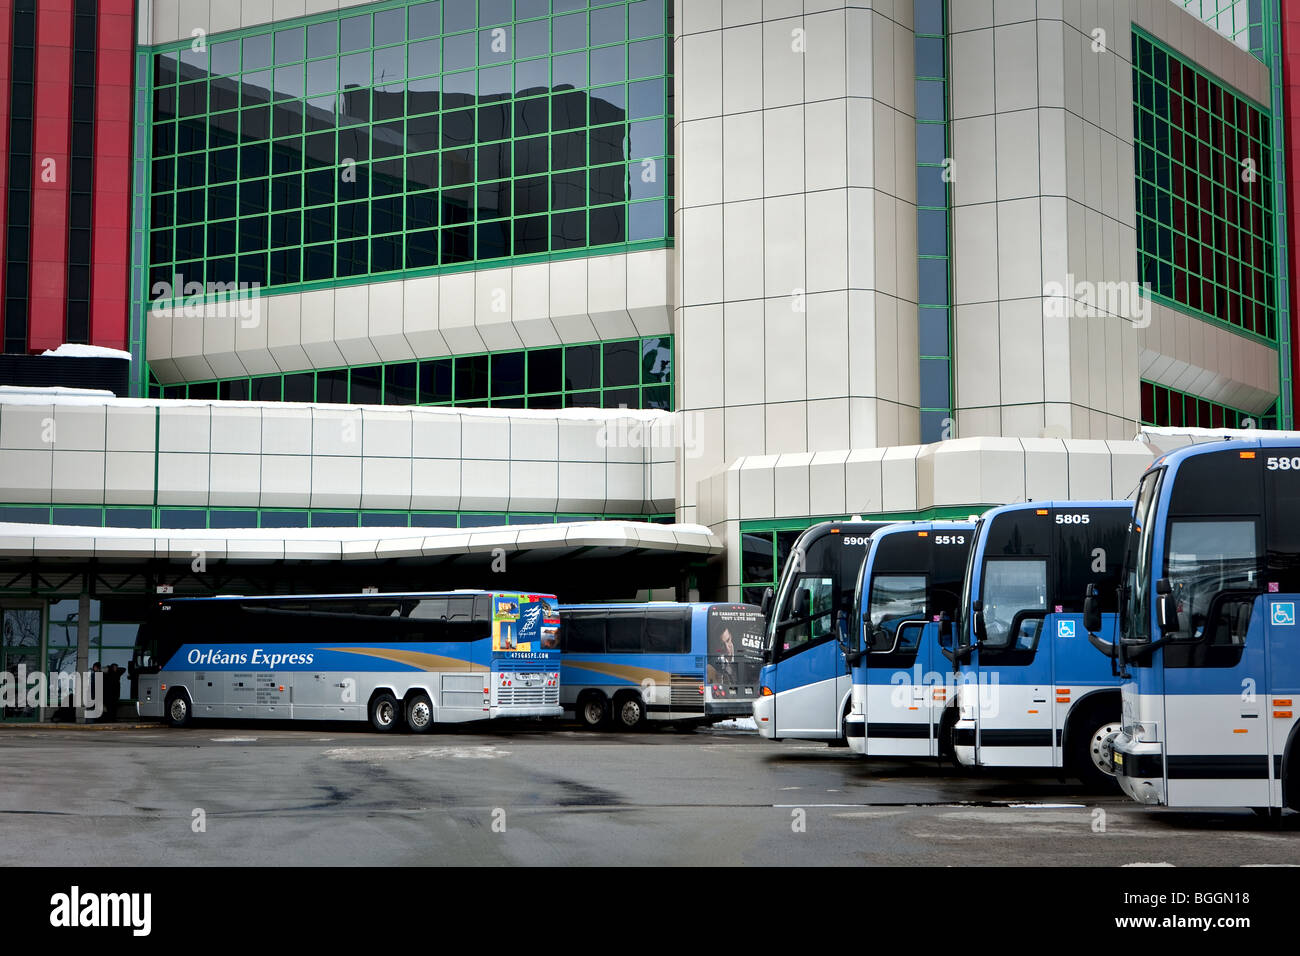 Orleans Express buses are pictured in front of the gare intermodal bus terminal in quebec city Stock Photo